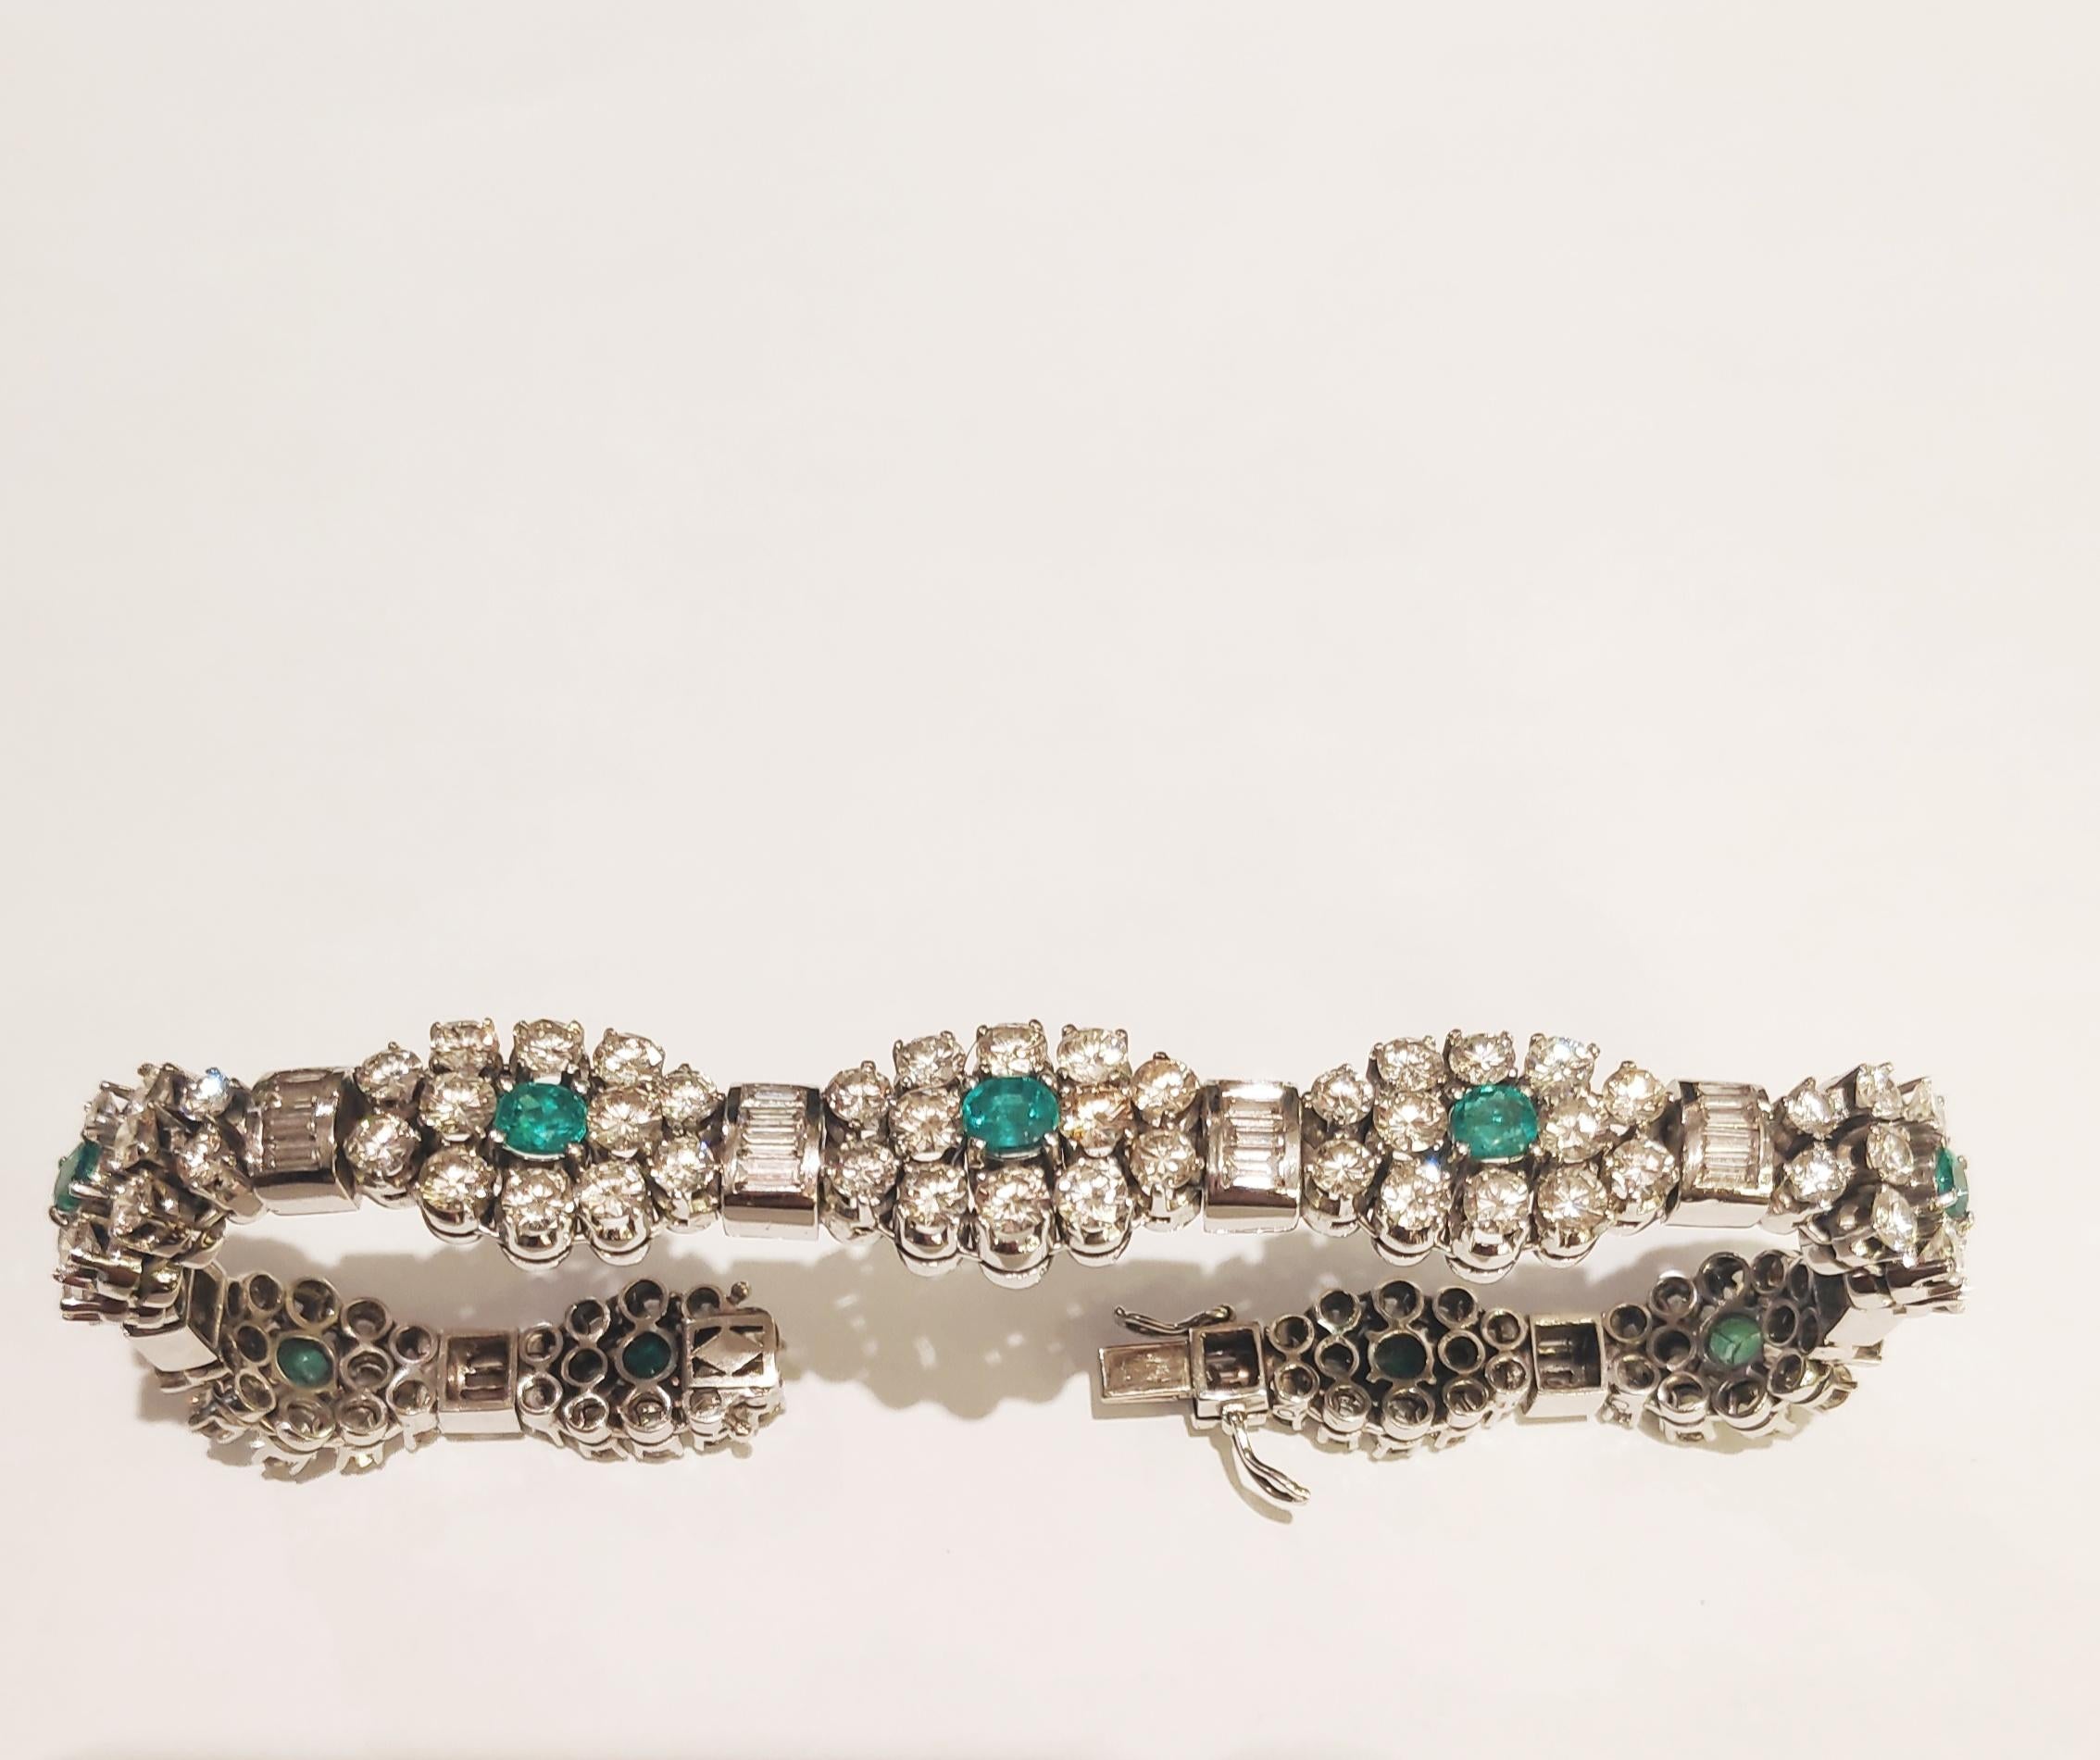 18kt gold Colombian emerald and brilliants bracelet 1940-1950,diamonds ct3 and emerald 6 ct.